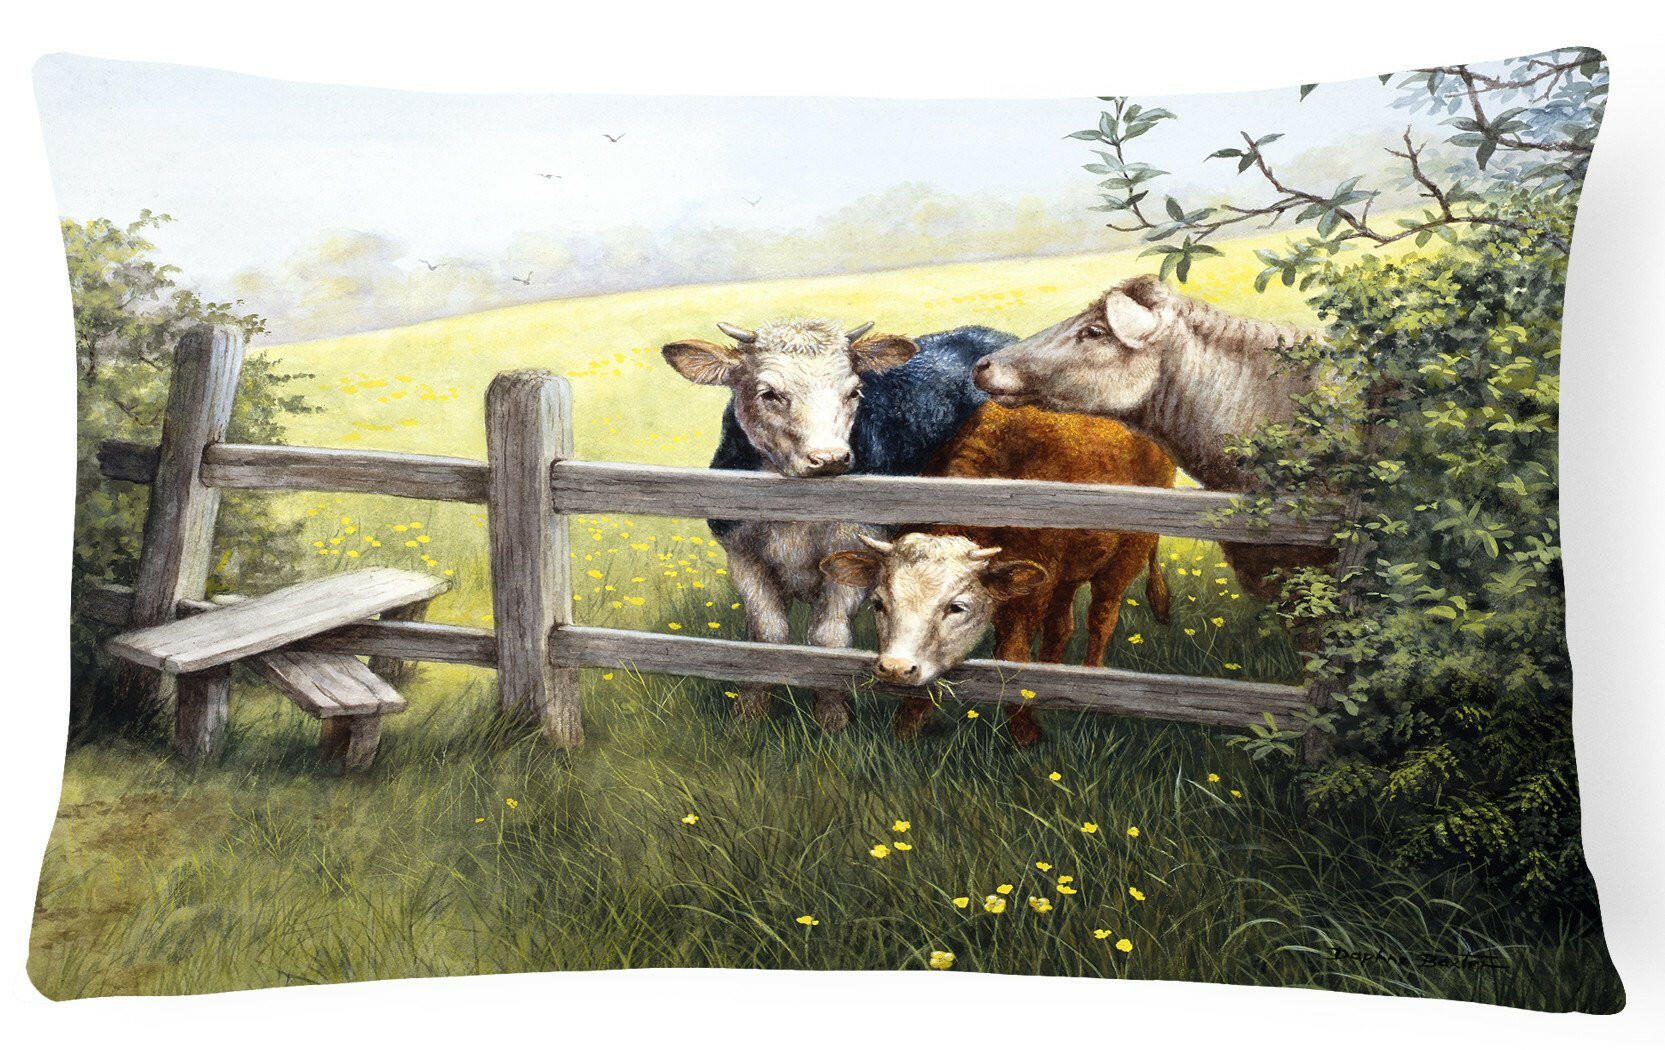 Cows in a Buttercup Meadow Fabric Decorative Pillow BDBA0103PW1216 by Caroline's Treasures